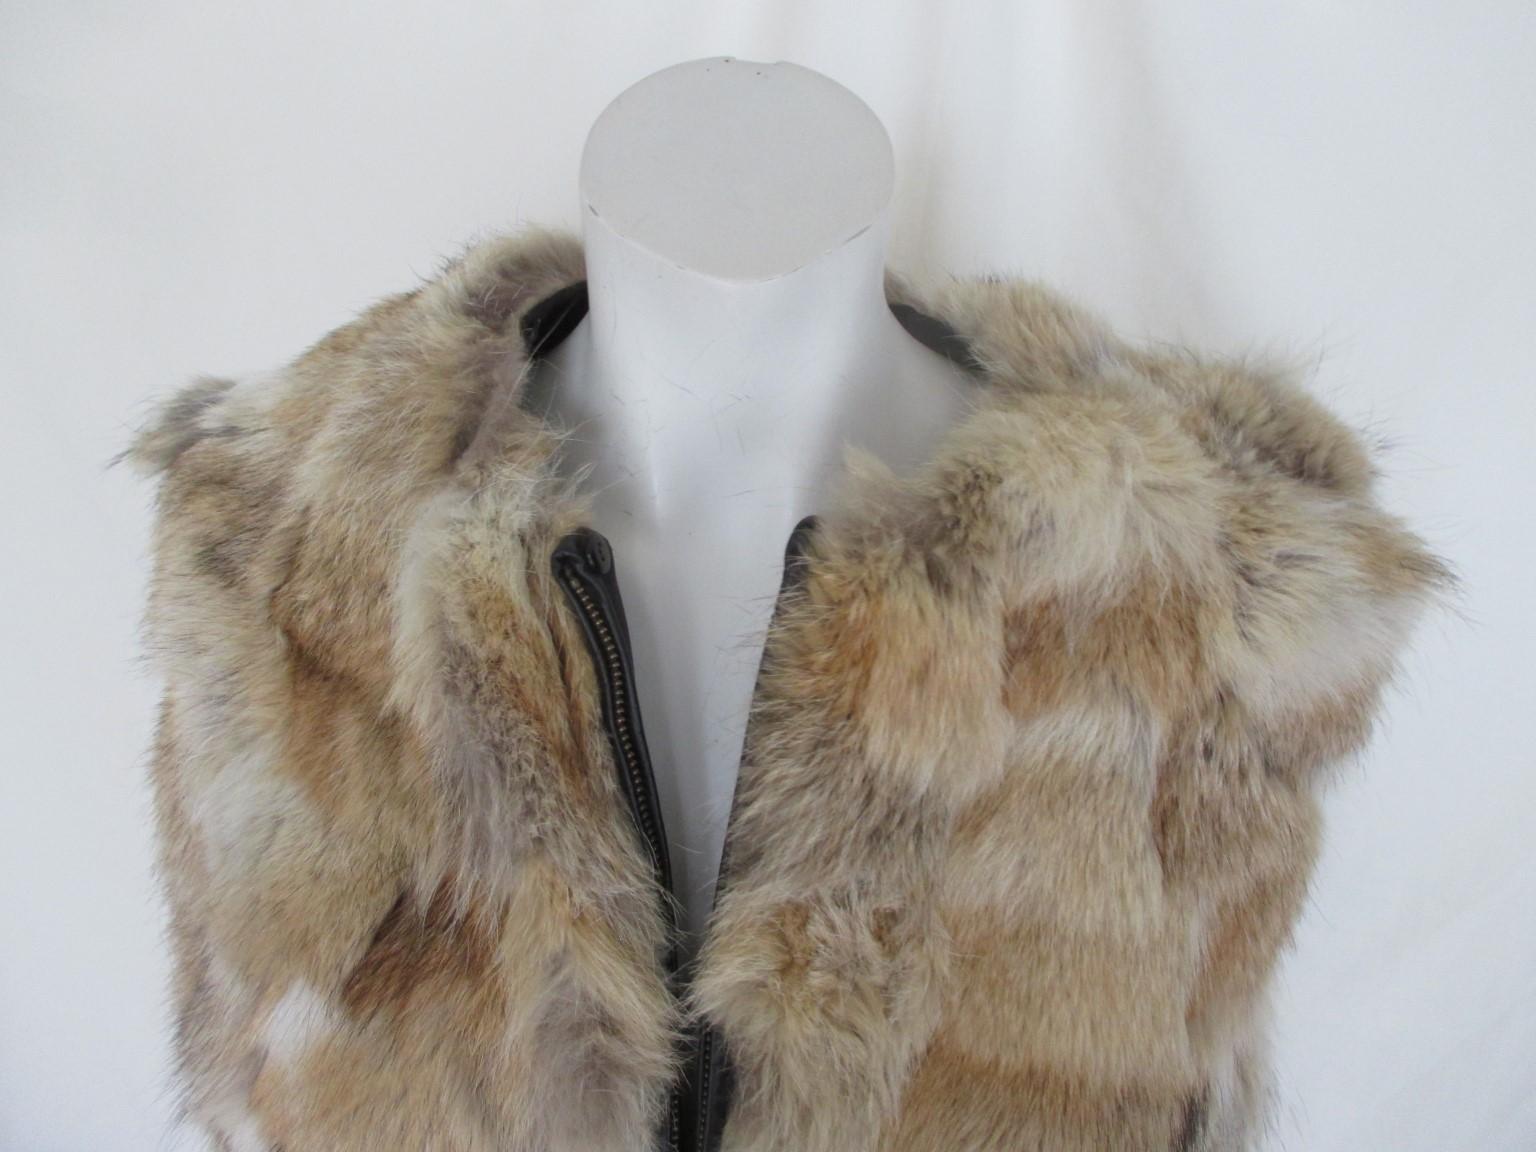 Feraud Paris Fox fur sleeveless body warmer/ jacket

We offer more exclusive fur and vintage items, view our fronstore

Details:
Zipper closure and 2 pockets
fully lined
Size aprox M,  check measurements
Can be worn by men or woman

Length 57